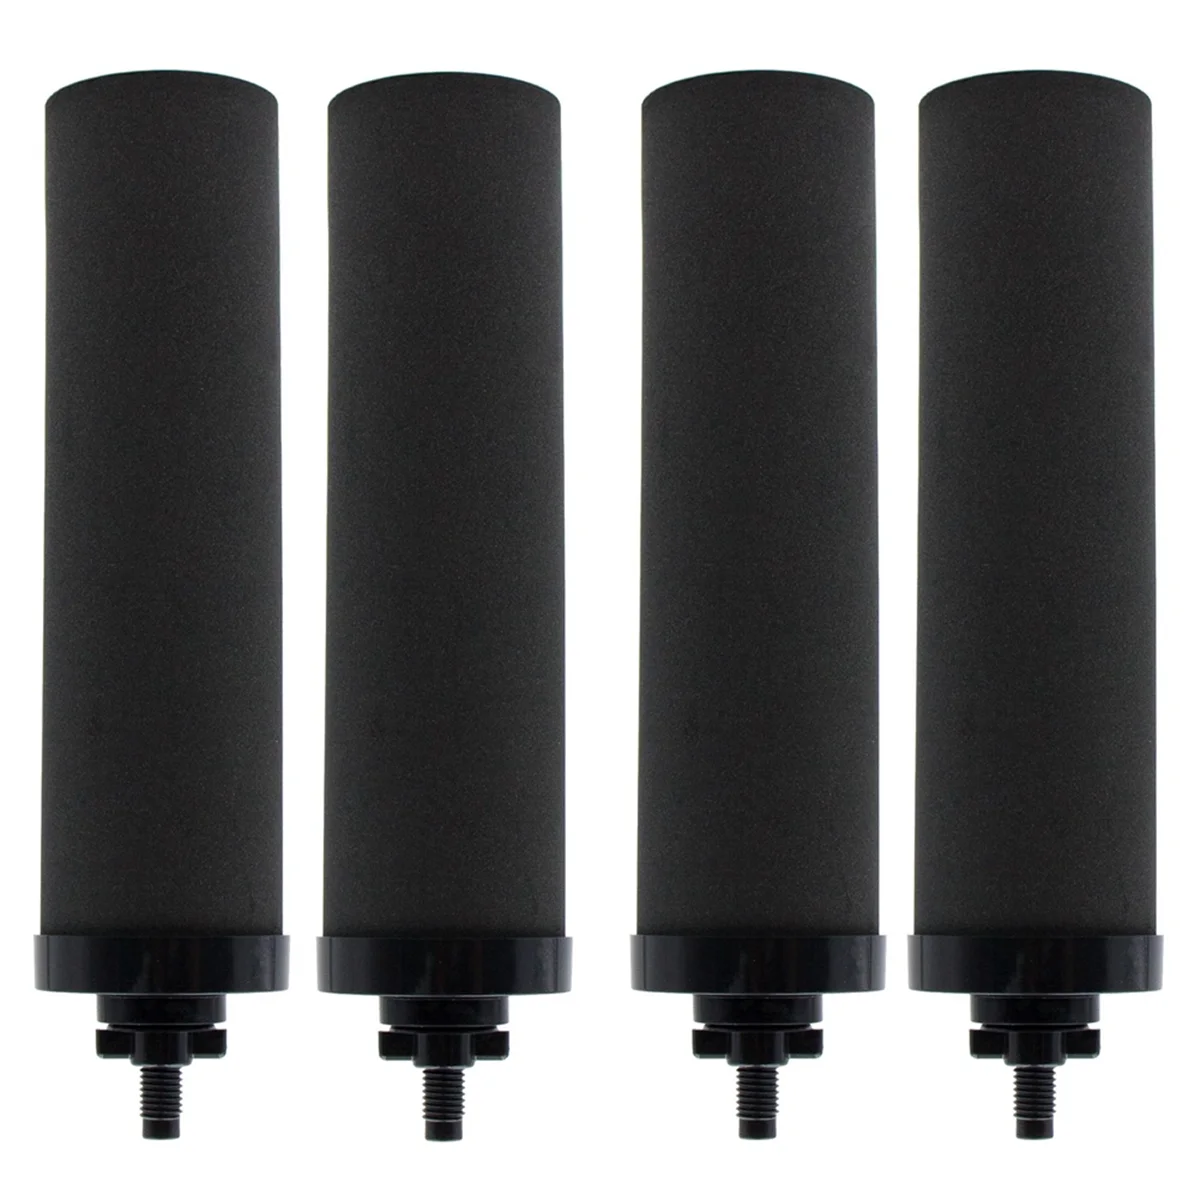 

4PCS Water Filter Replacement for BERKEY Black Activated Carbon BB9-2 Filters for Gravity-Fed Water Filter System